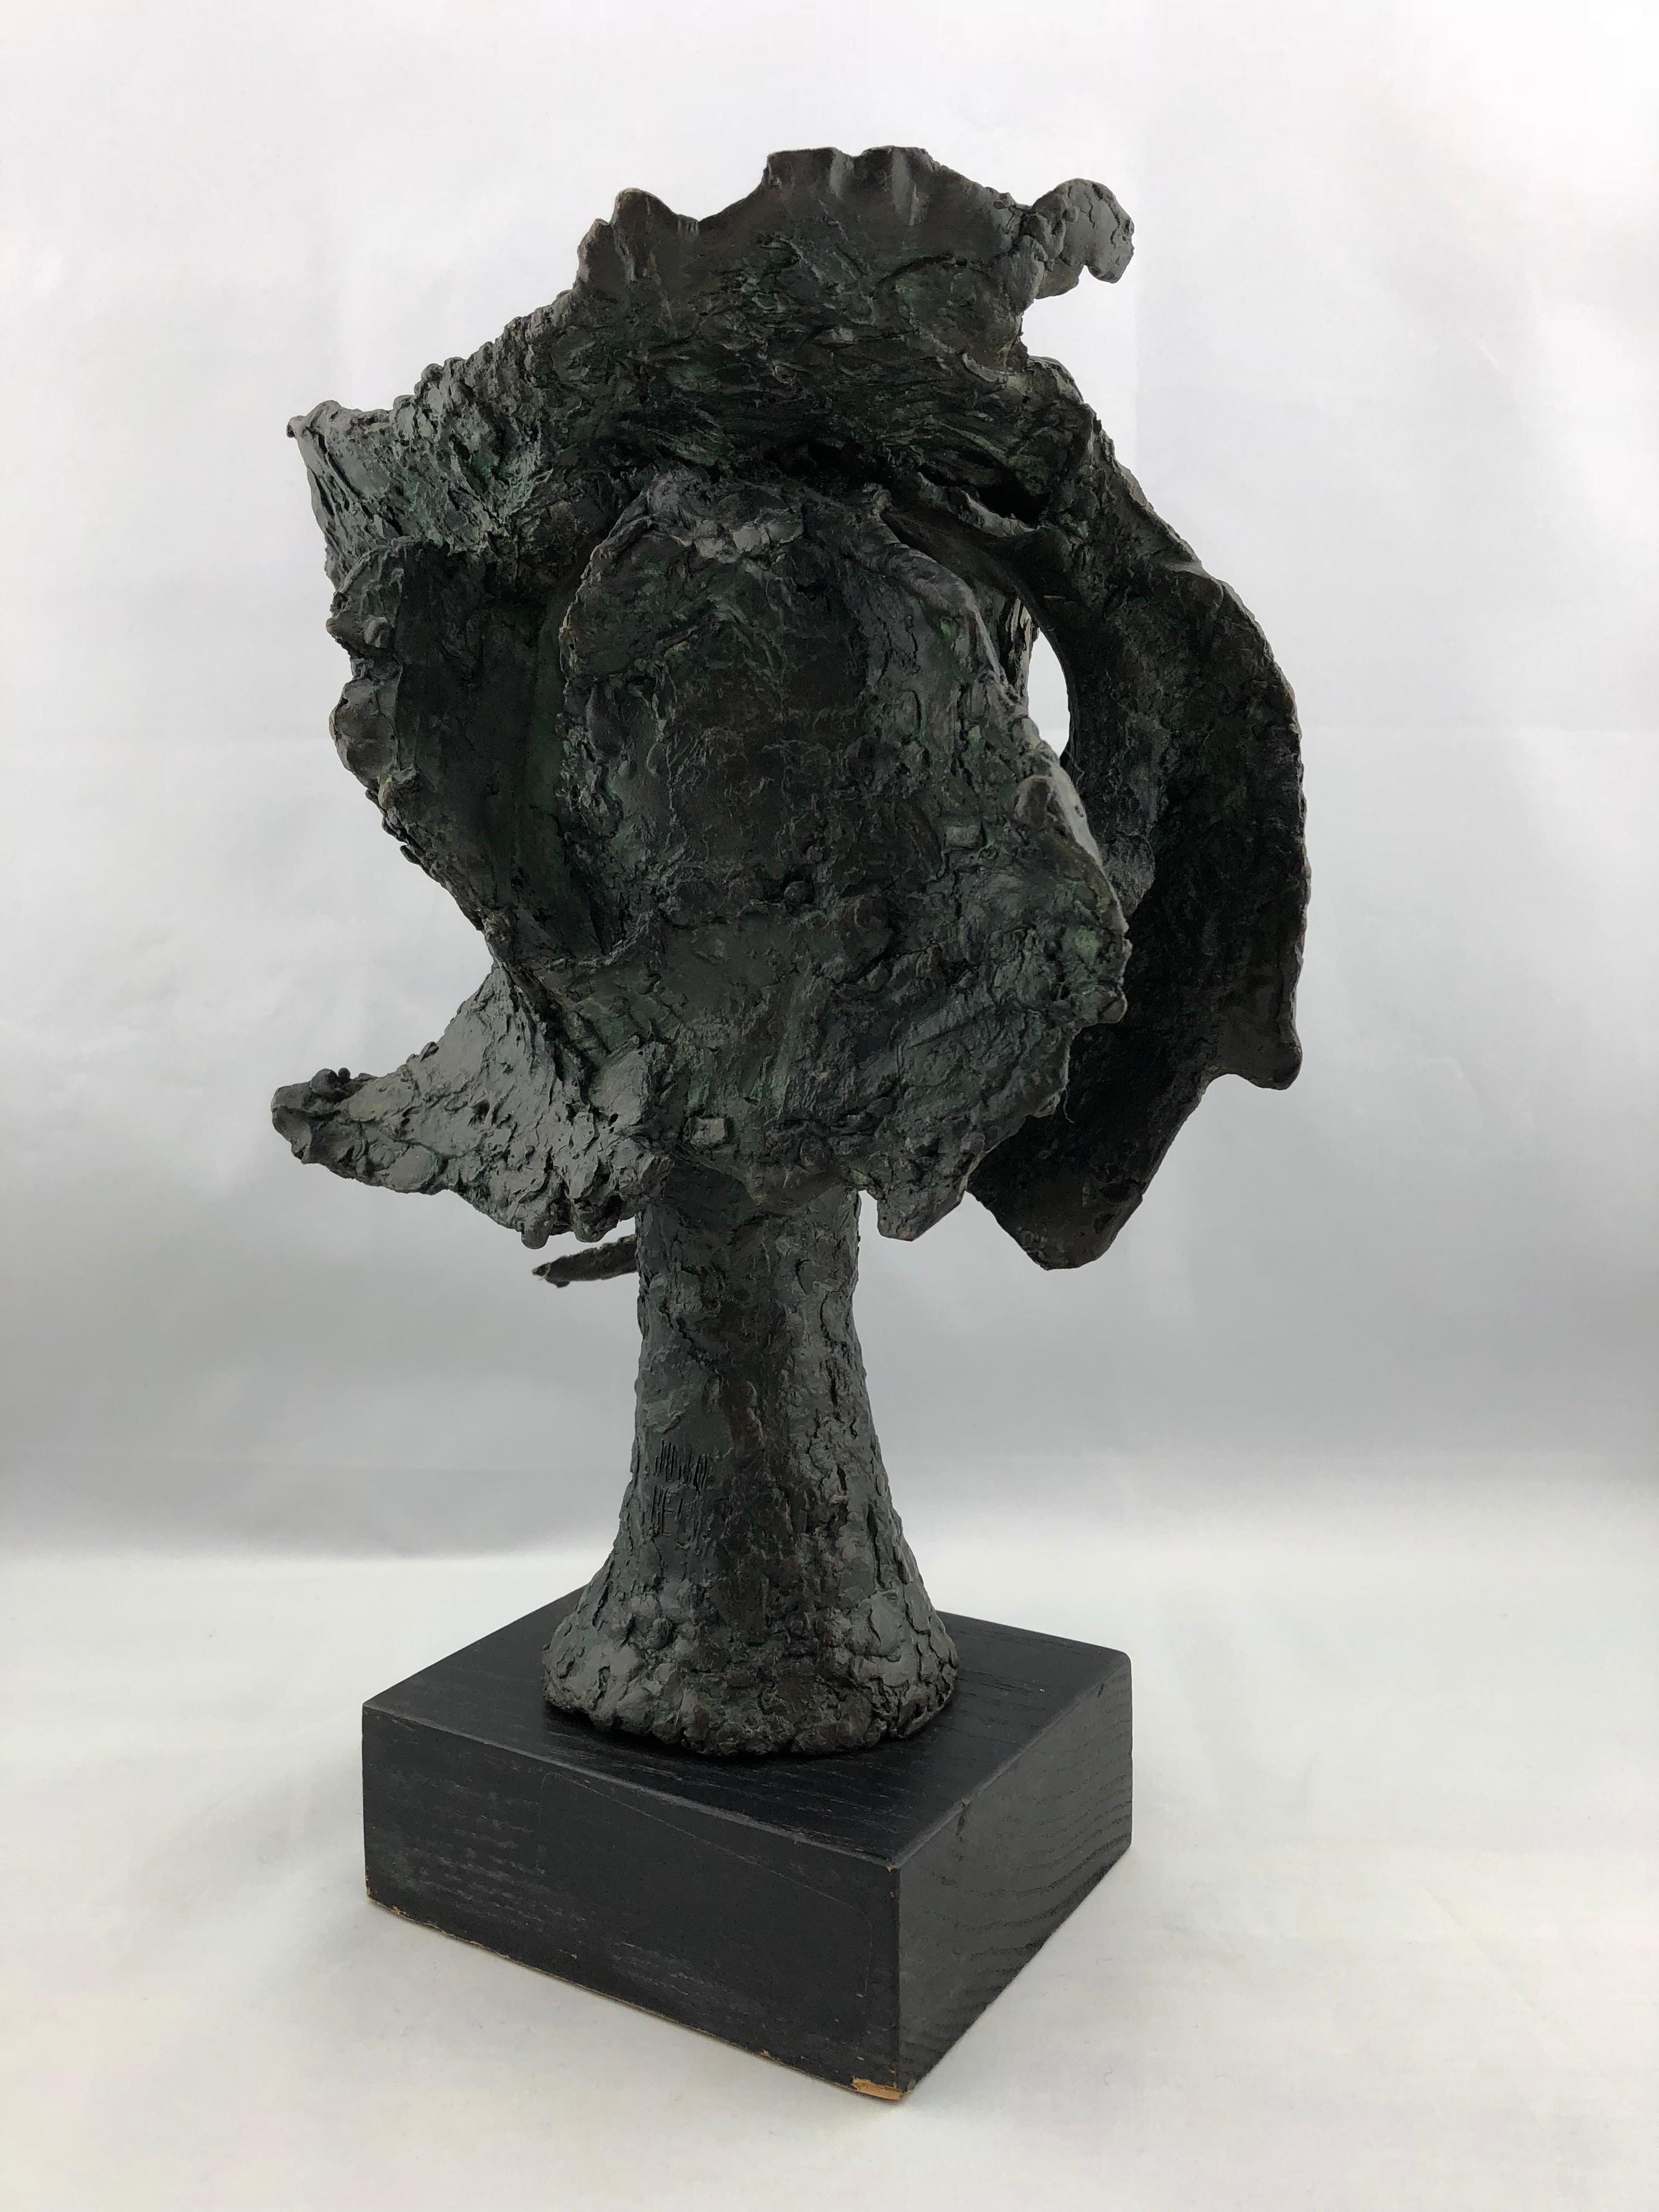 Rare Vintage Bronze Sculpture by Artist John Begg, Signed and Numbered 1 of 1 3